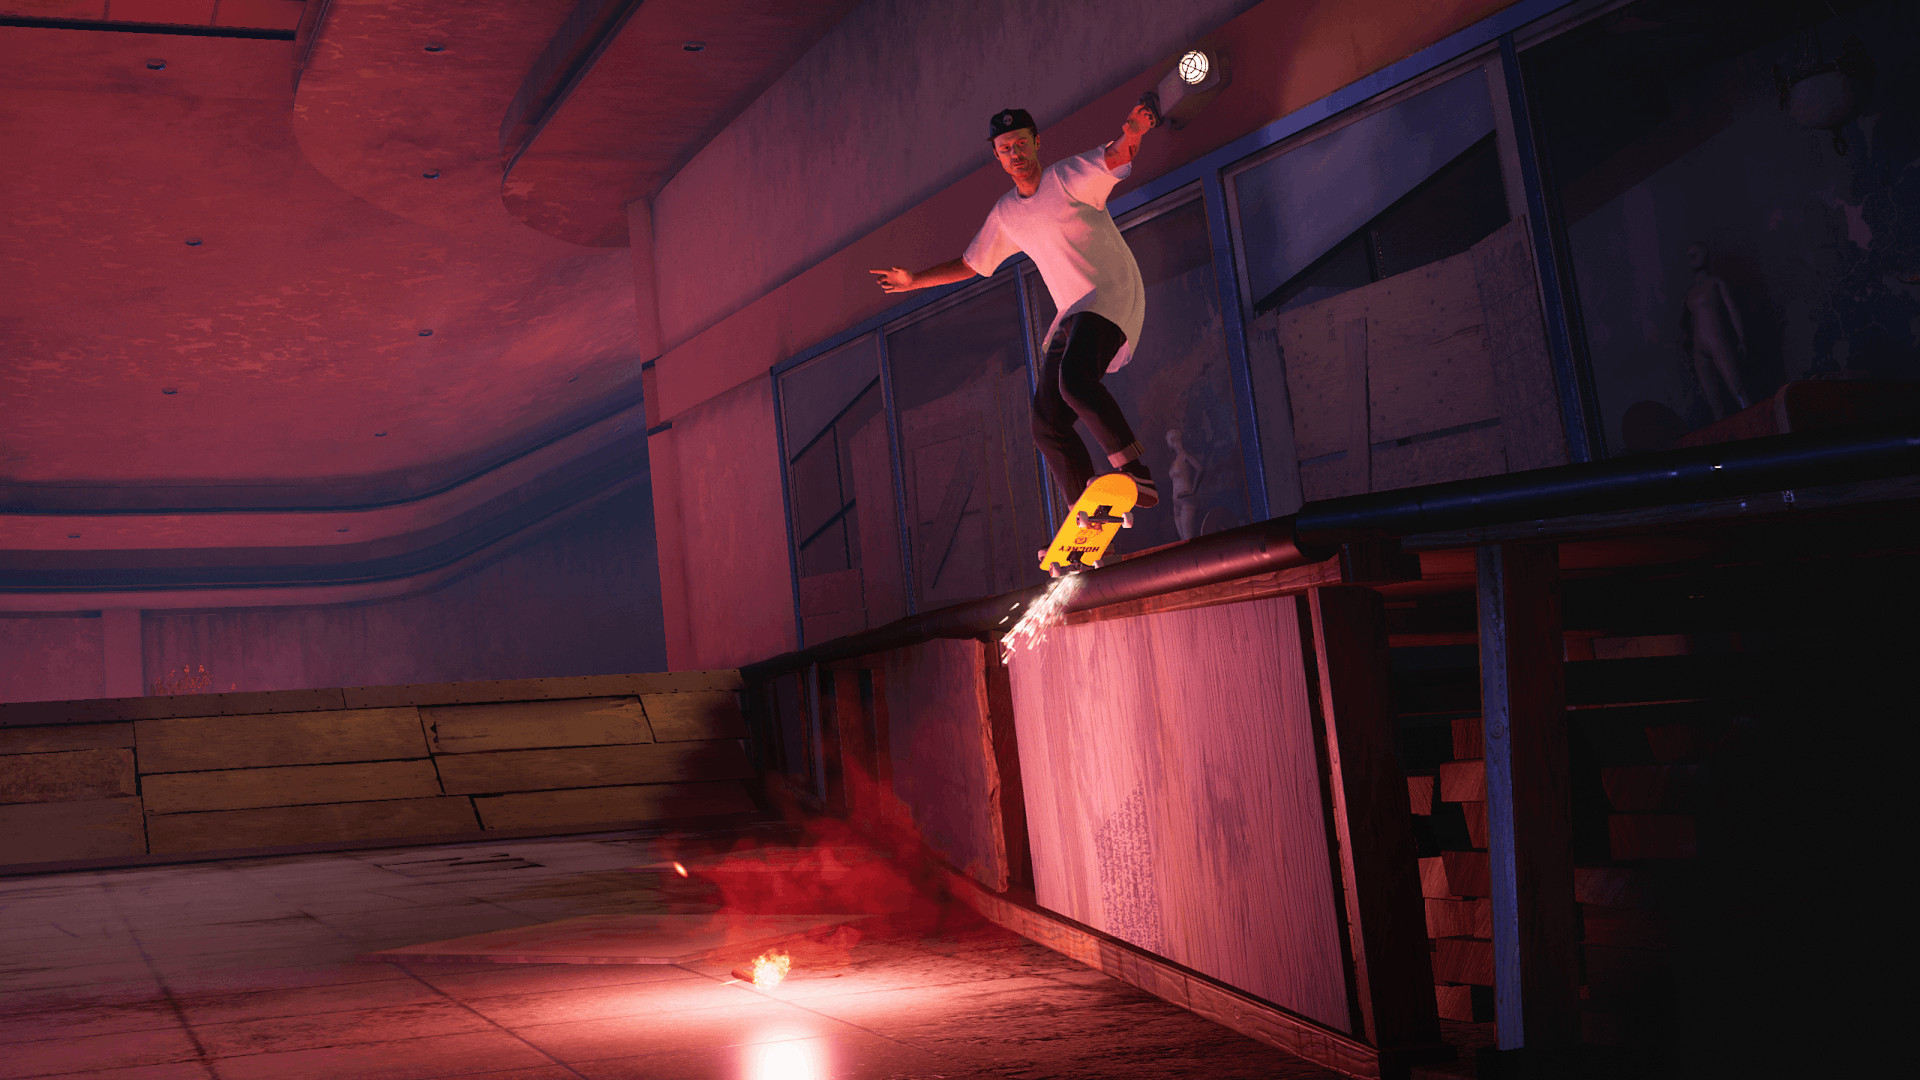 Tony Hawk's Pro Skater 1 And 2 Remake - Create-A-Skater, Create-A-Park &  More! 